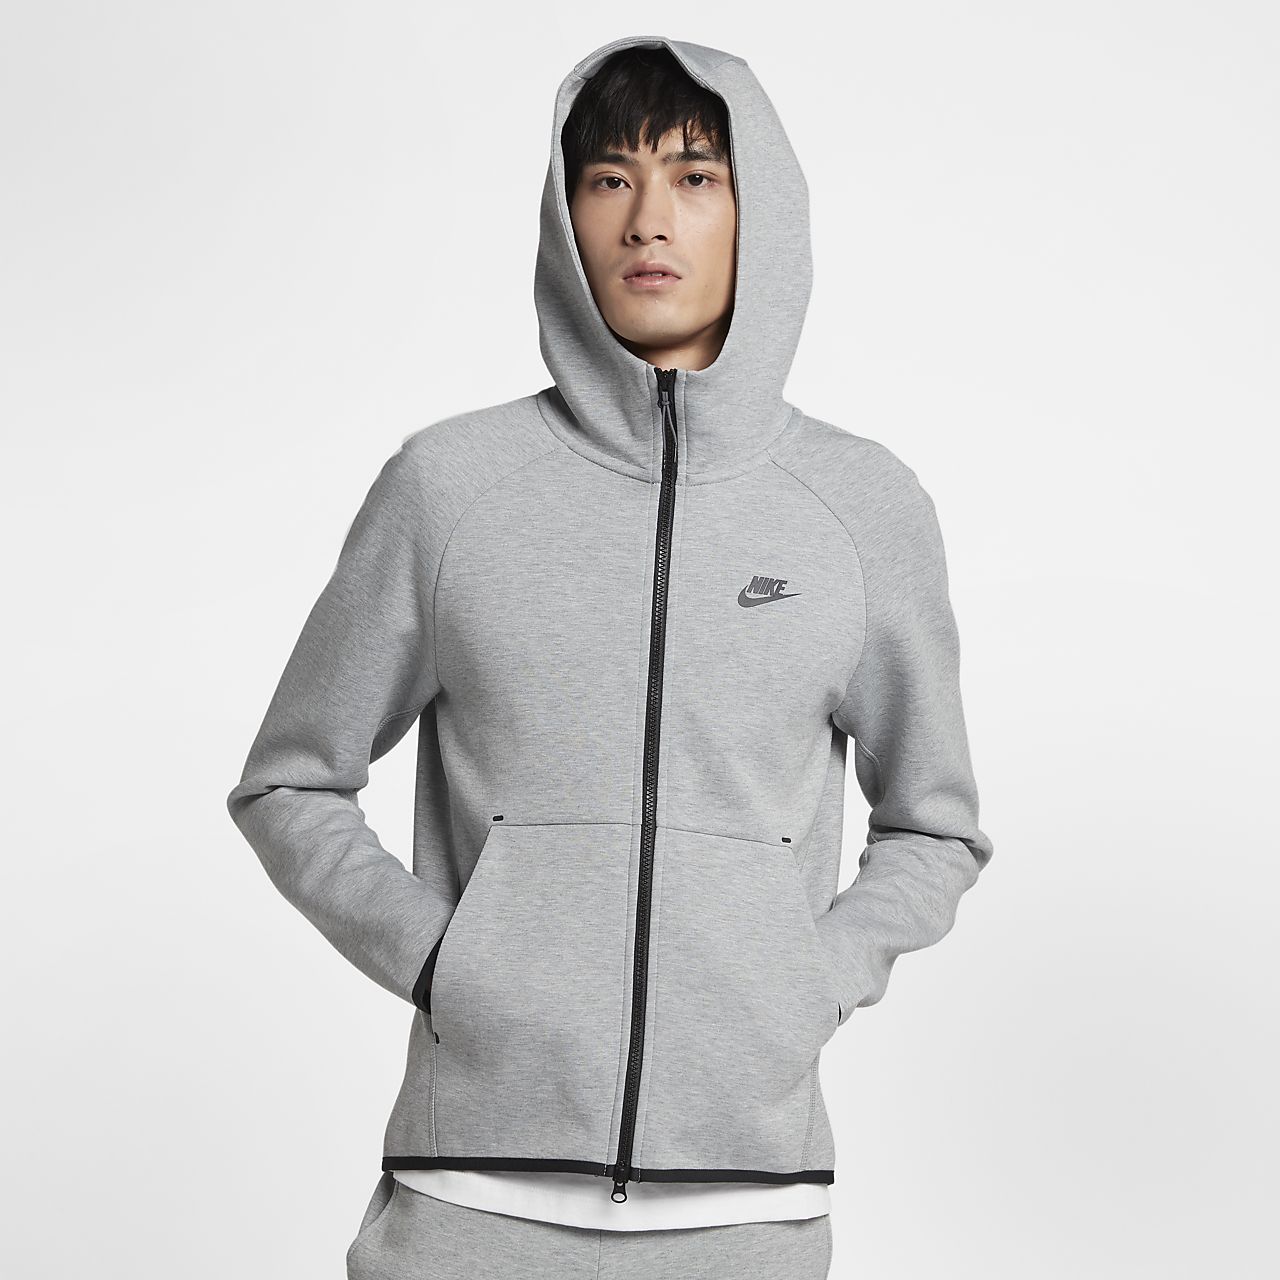 Buy > nike tech tracksuit dhgate > in stock